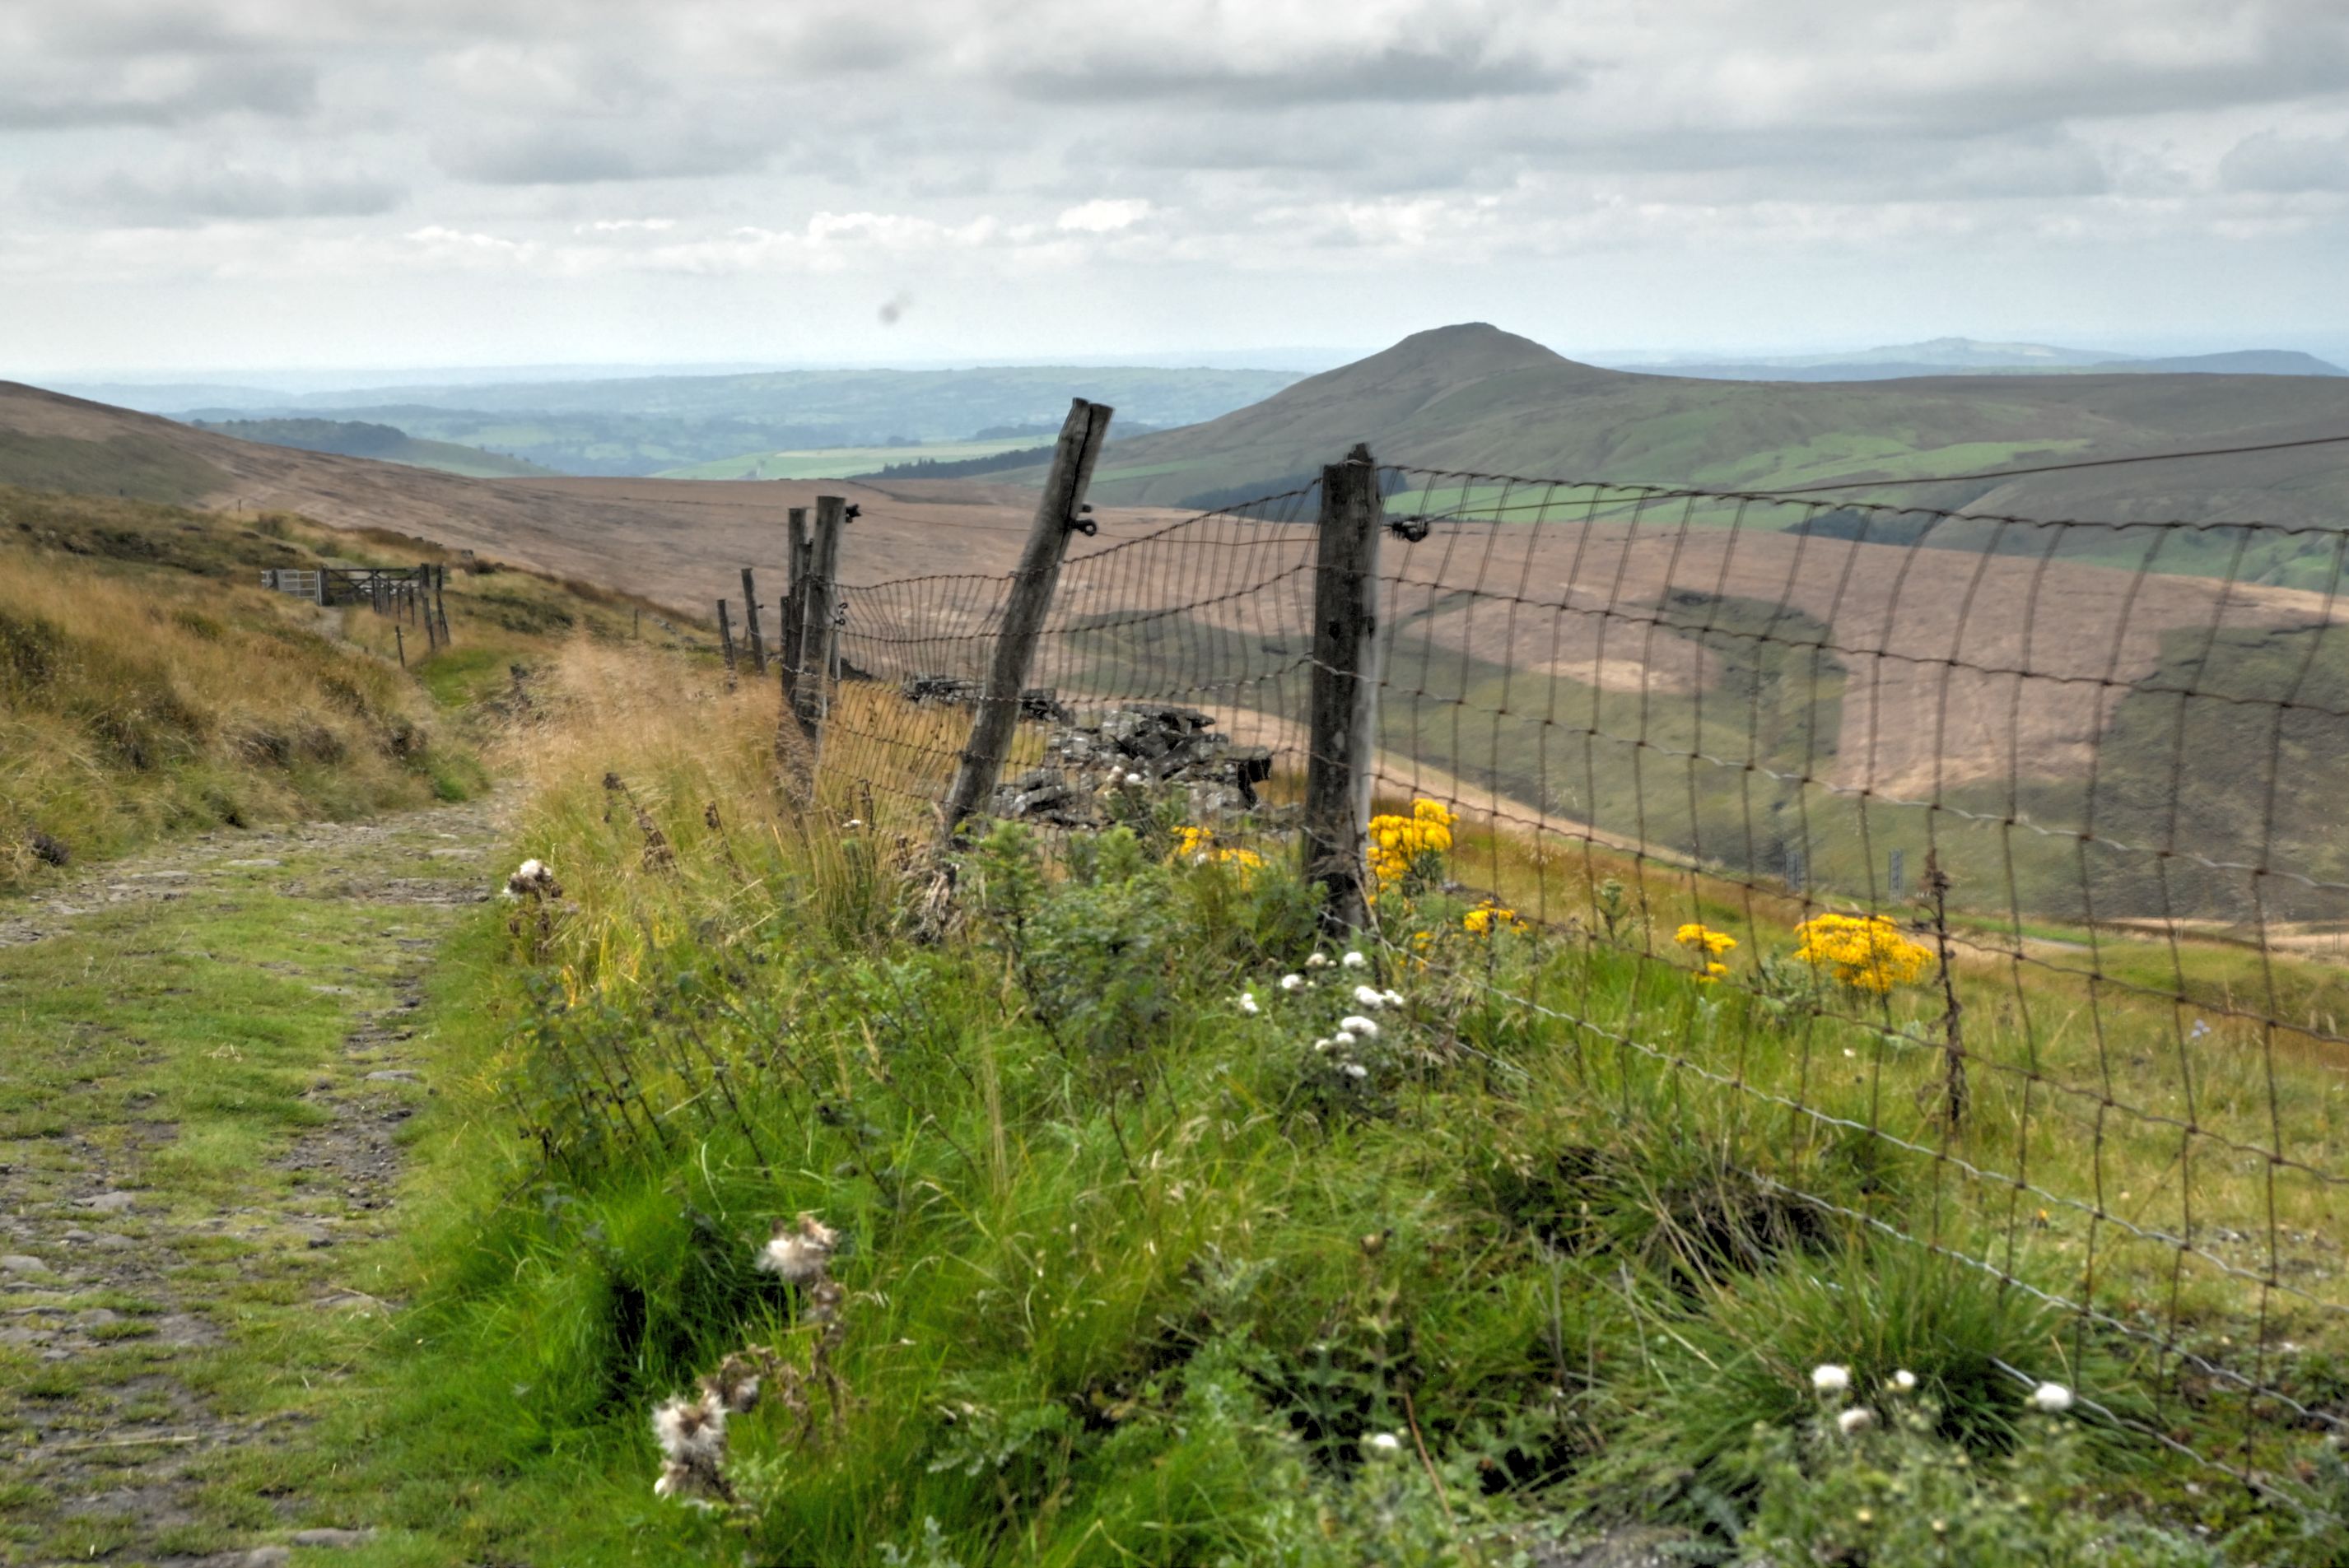 Track to Shiningg Tor from Cat & Fiddle